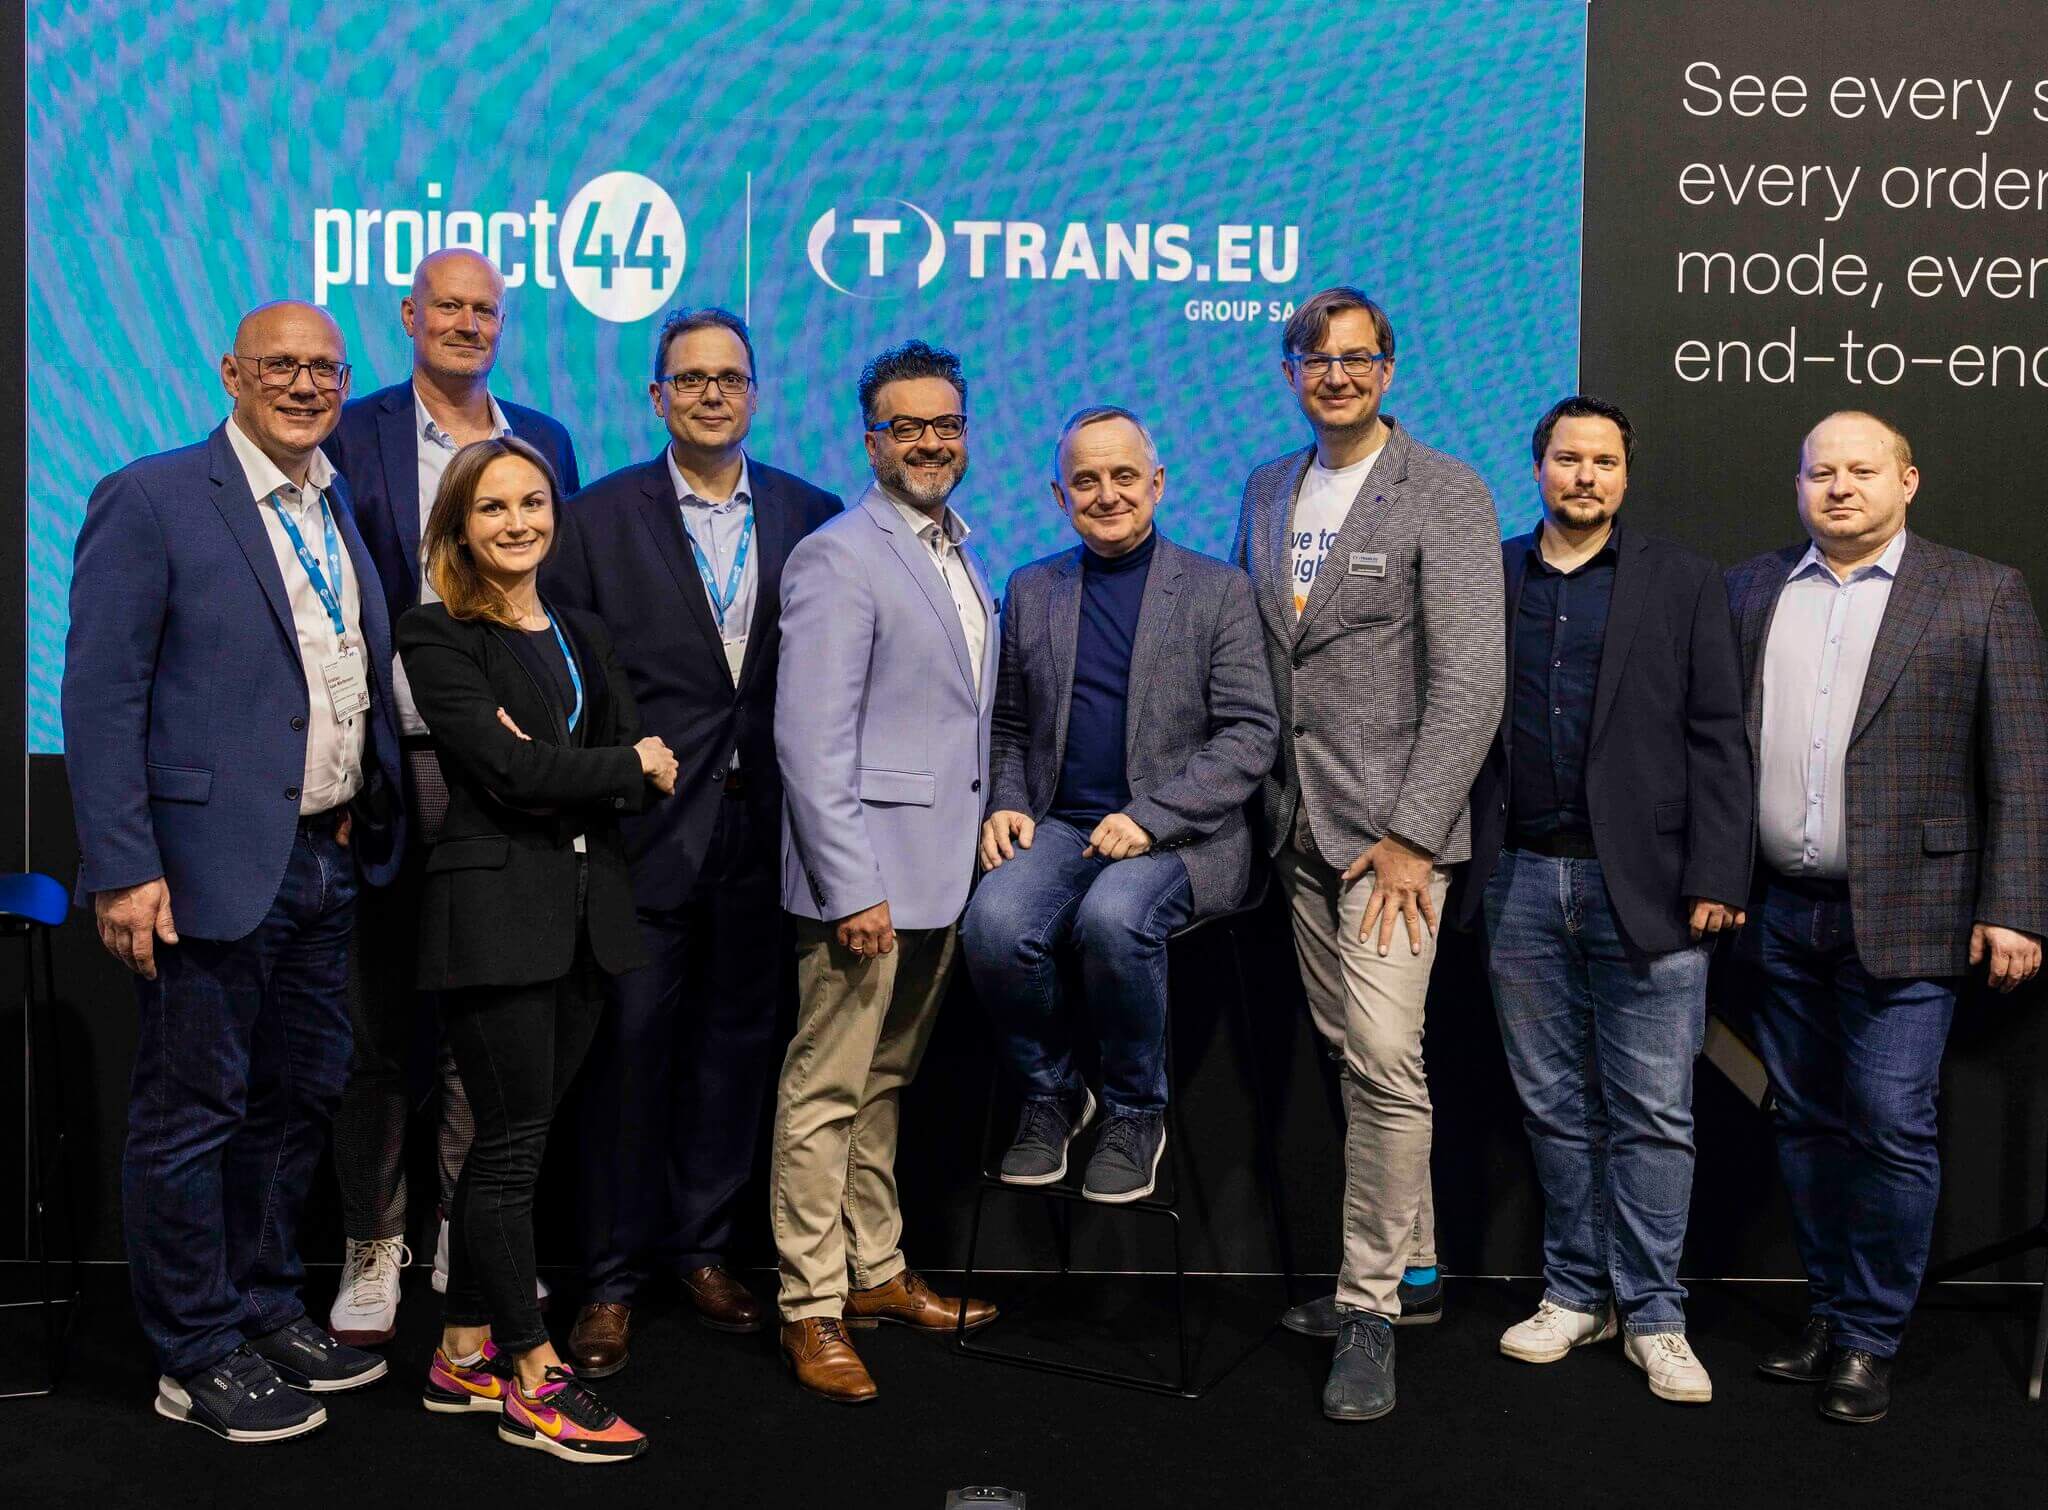 project44 and Trans.eu Group are teaming up